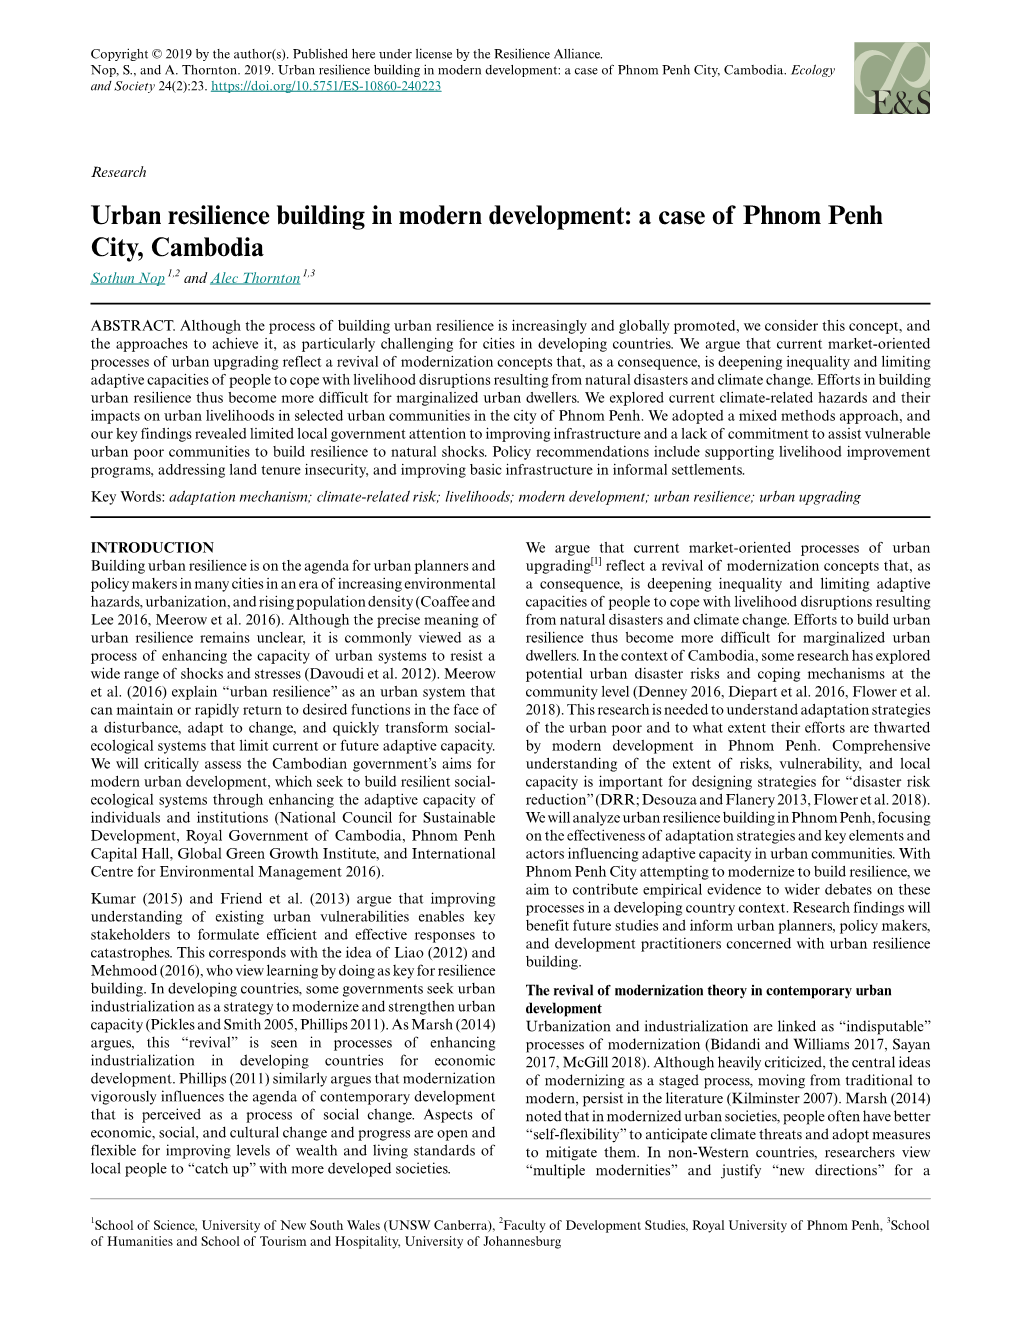 Urban Resilience Building in Modern Development: a Case of Phnom Penh City, Cambodia